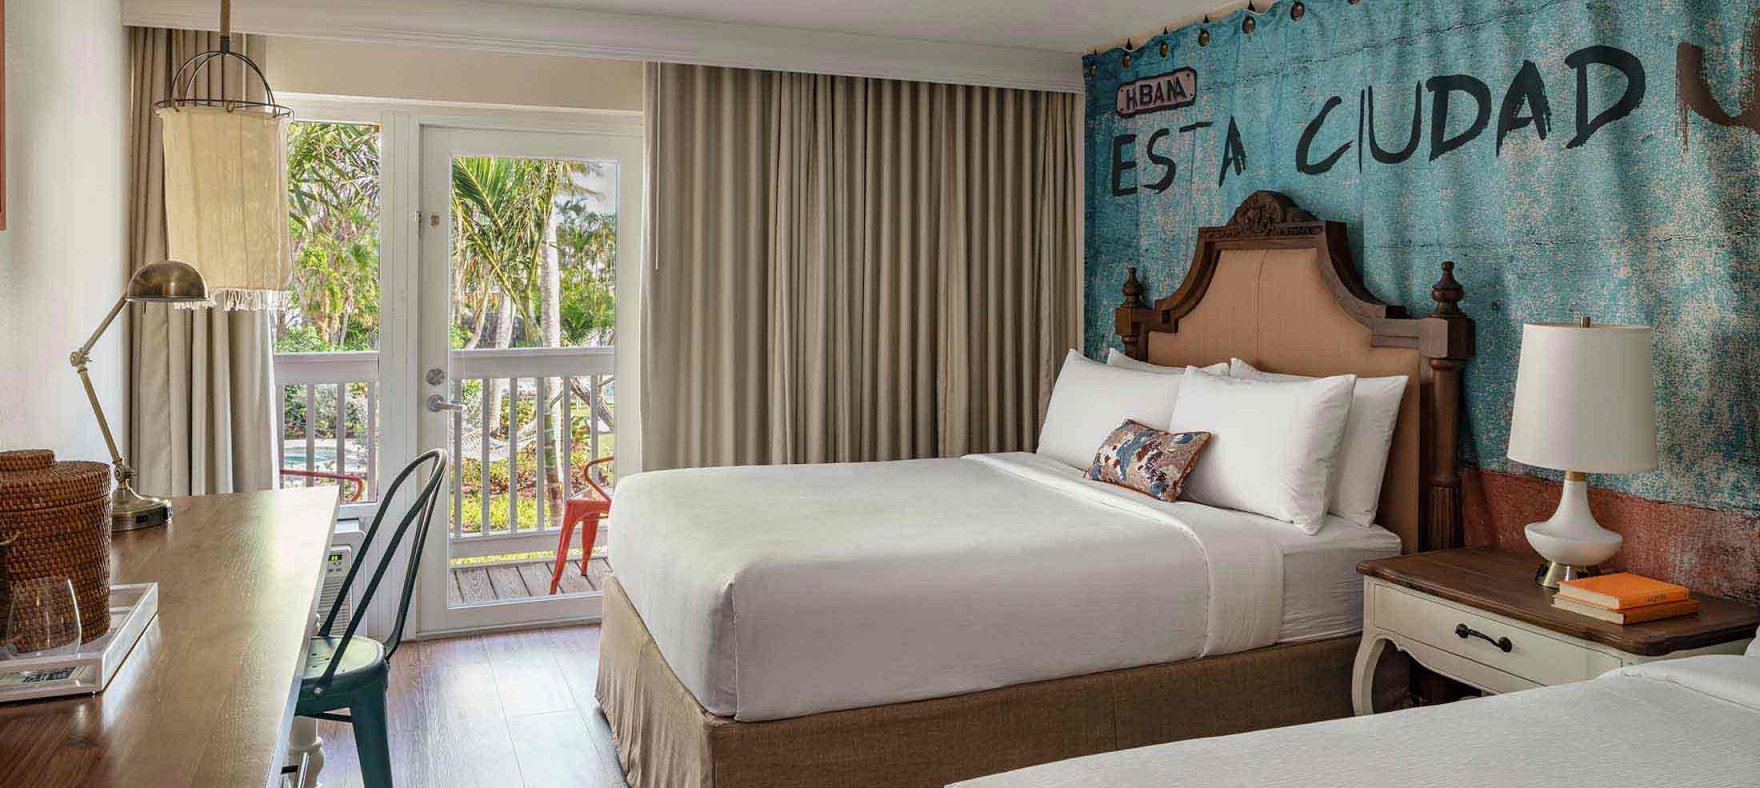 Twin queen-sized beds with a bedside table in between overlooking a desk